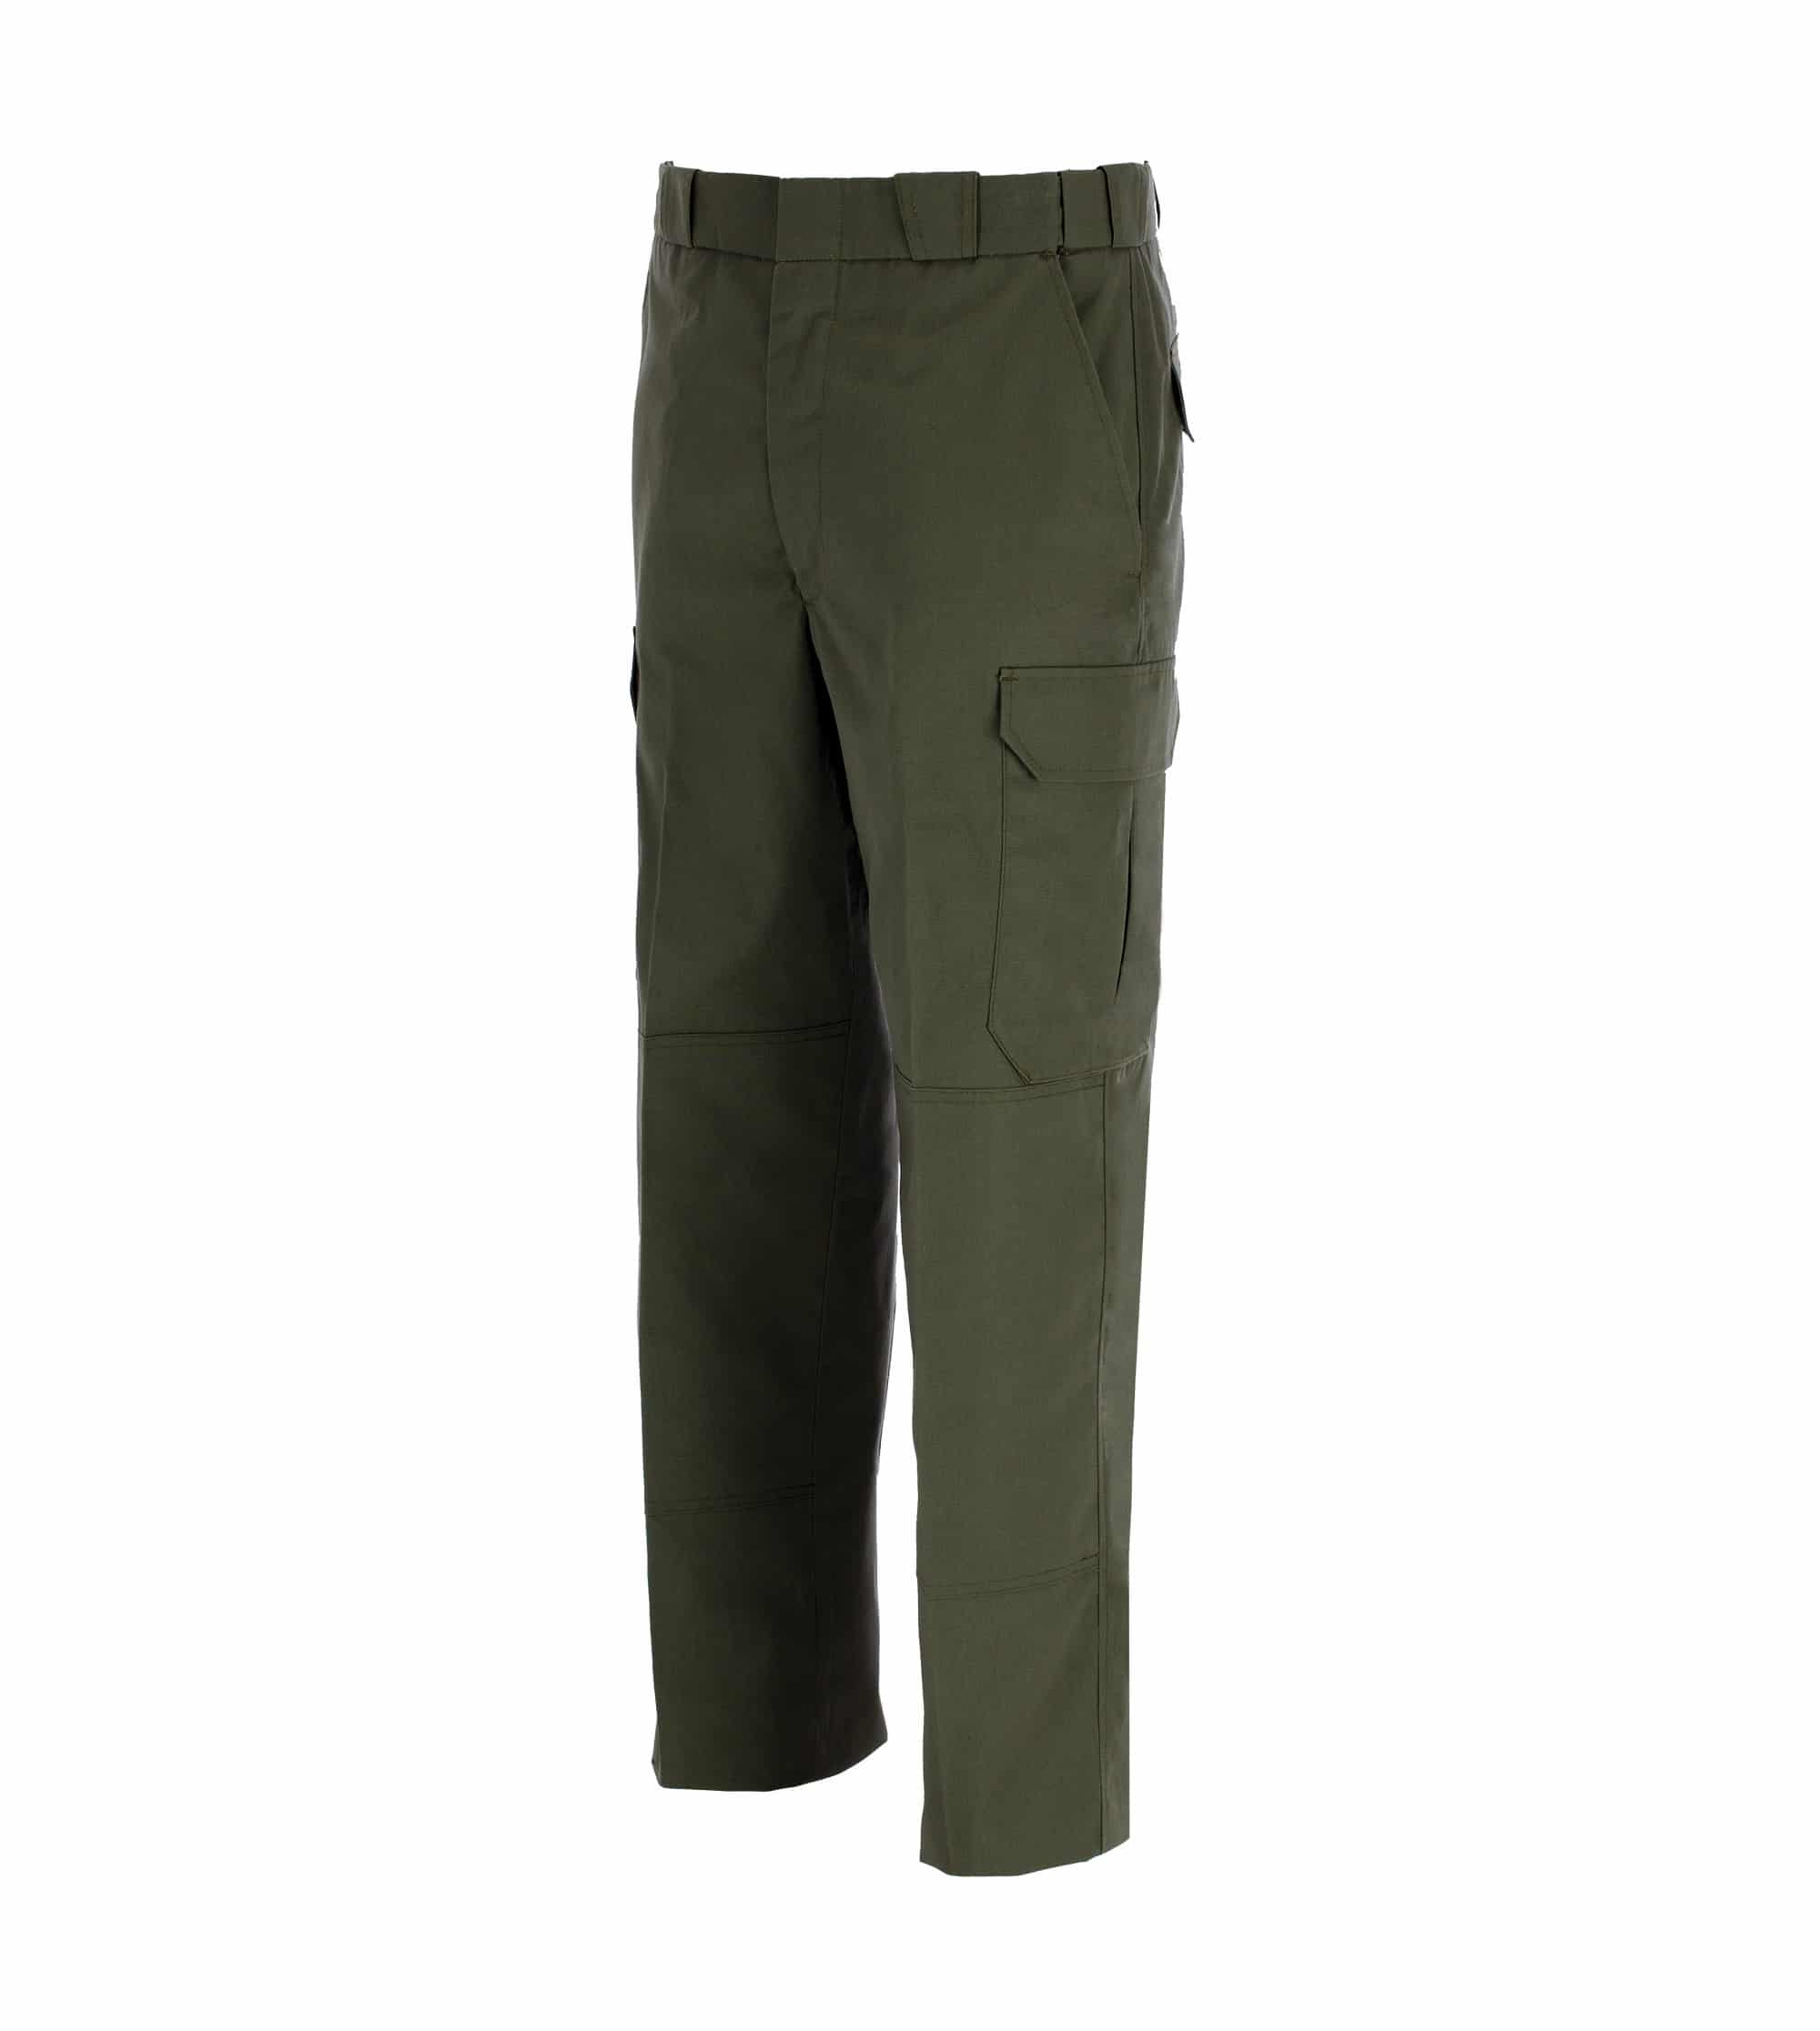 Beige Military Style Combat Trousers | Army & Navy Stores UK